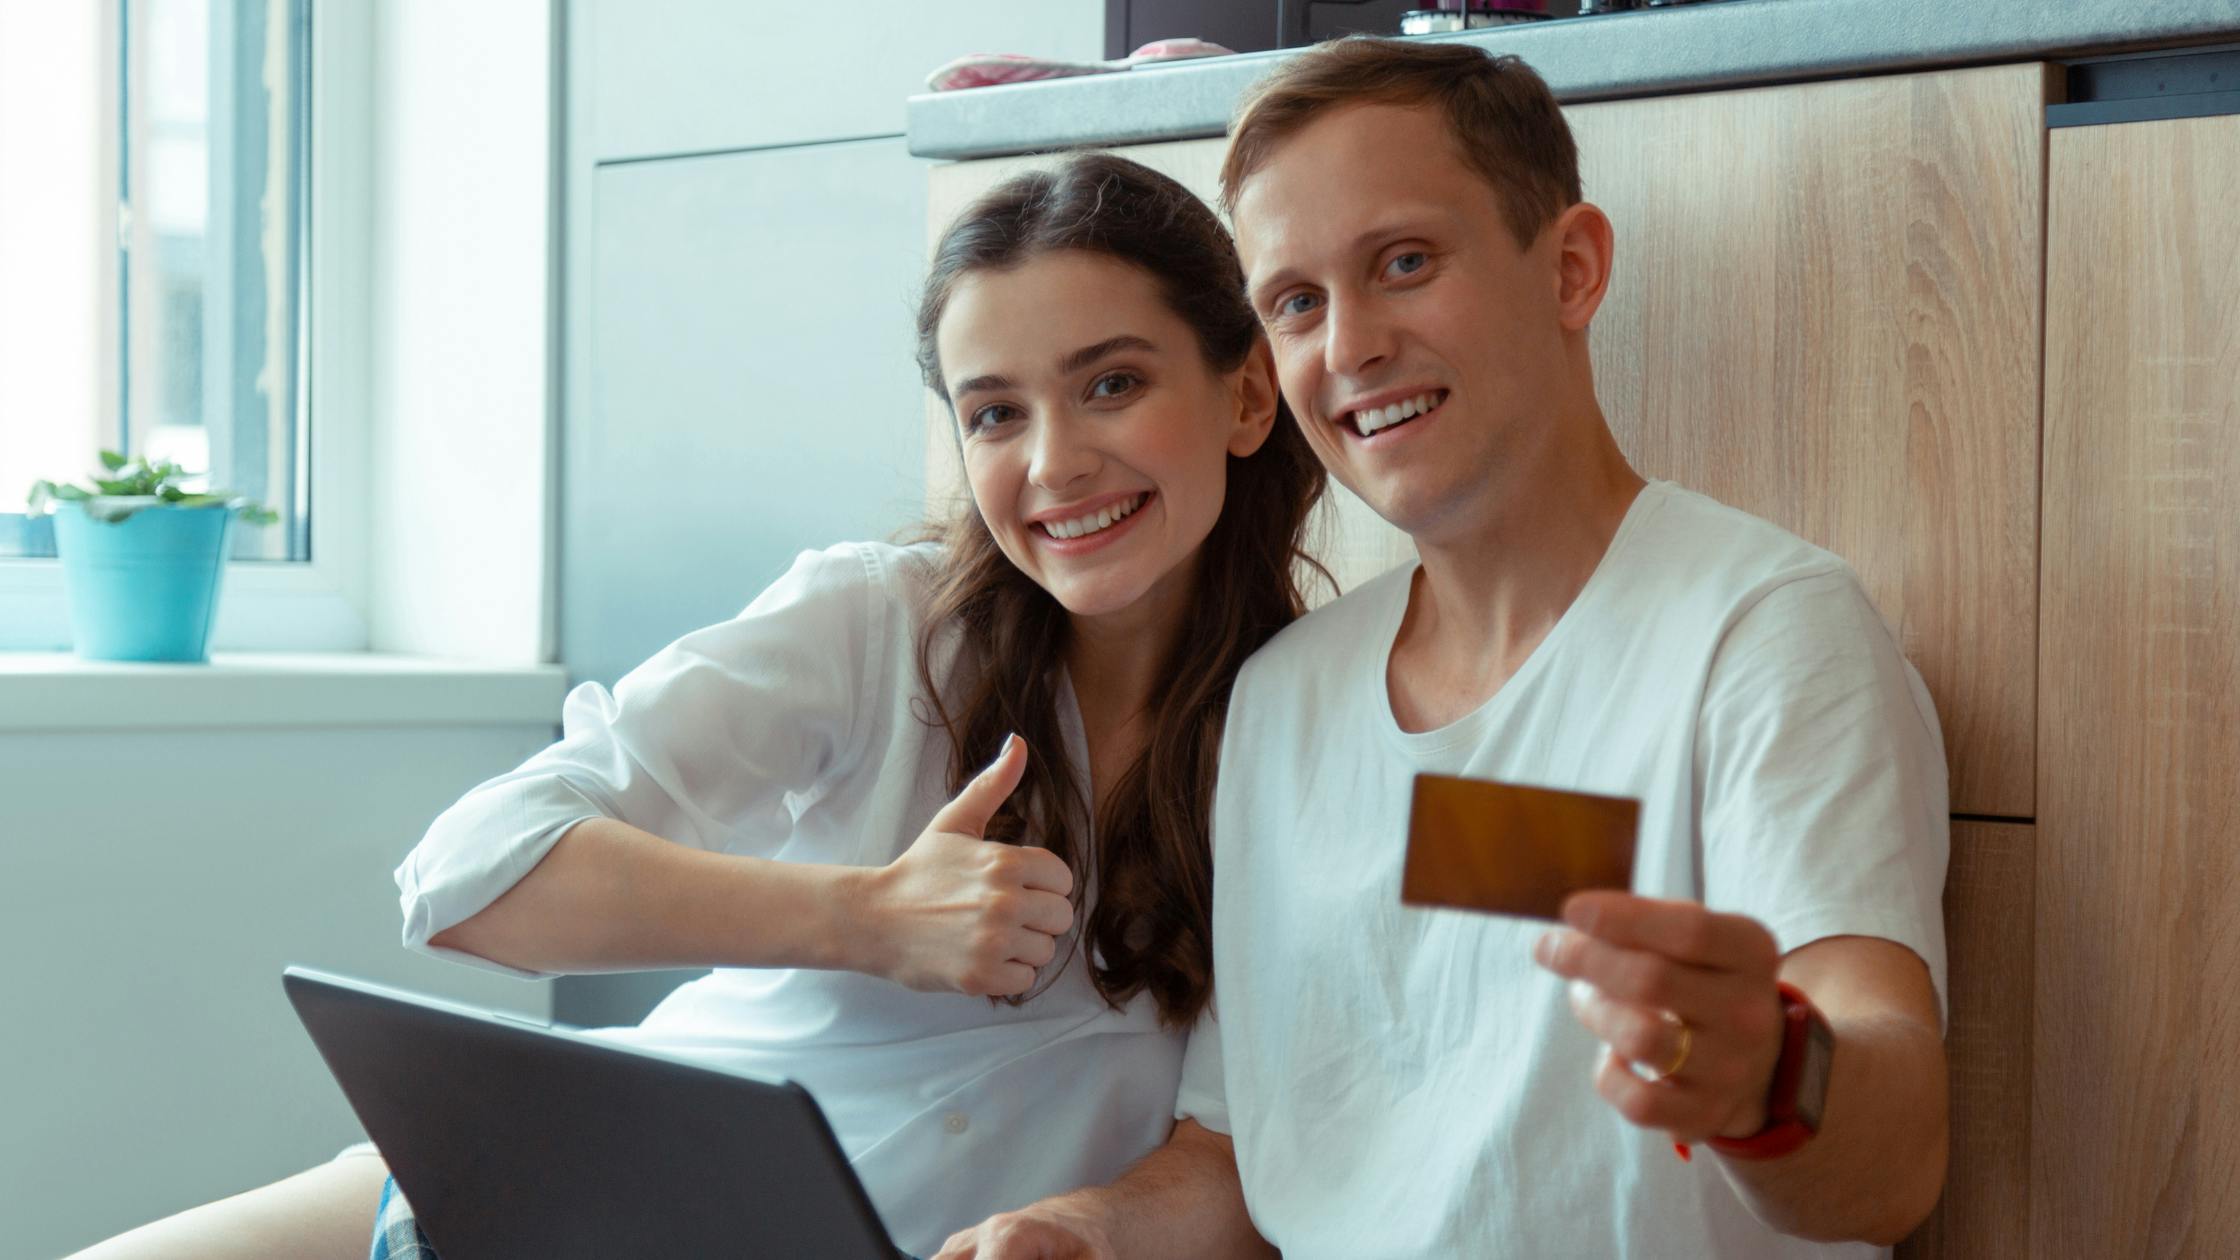 Two smiling people sit on the ground. One holds a credit card up to the viewer, the other has a laptop on their lap and holds a thumbs up to the camera